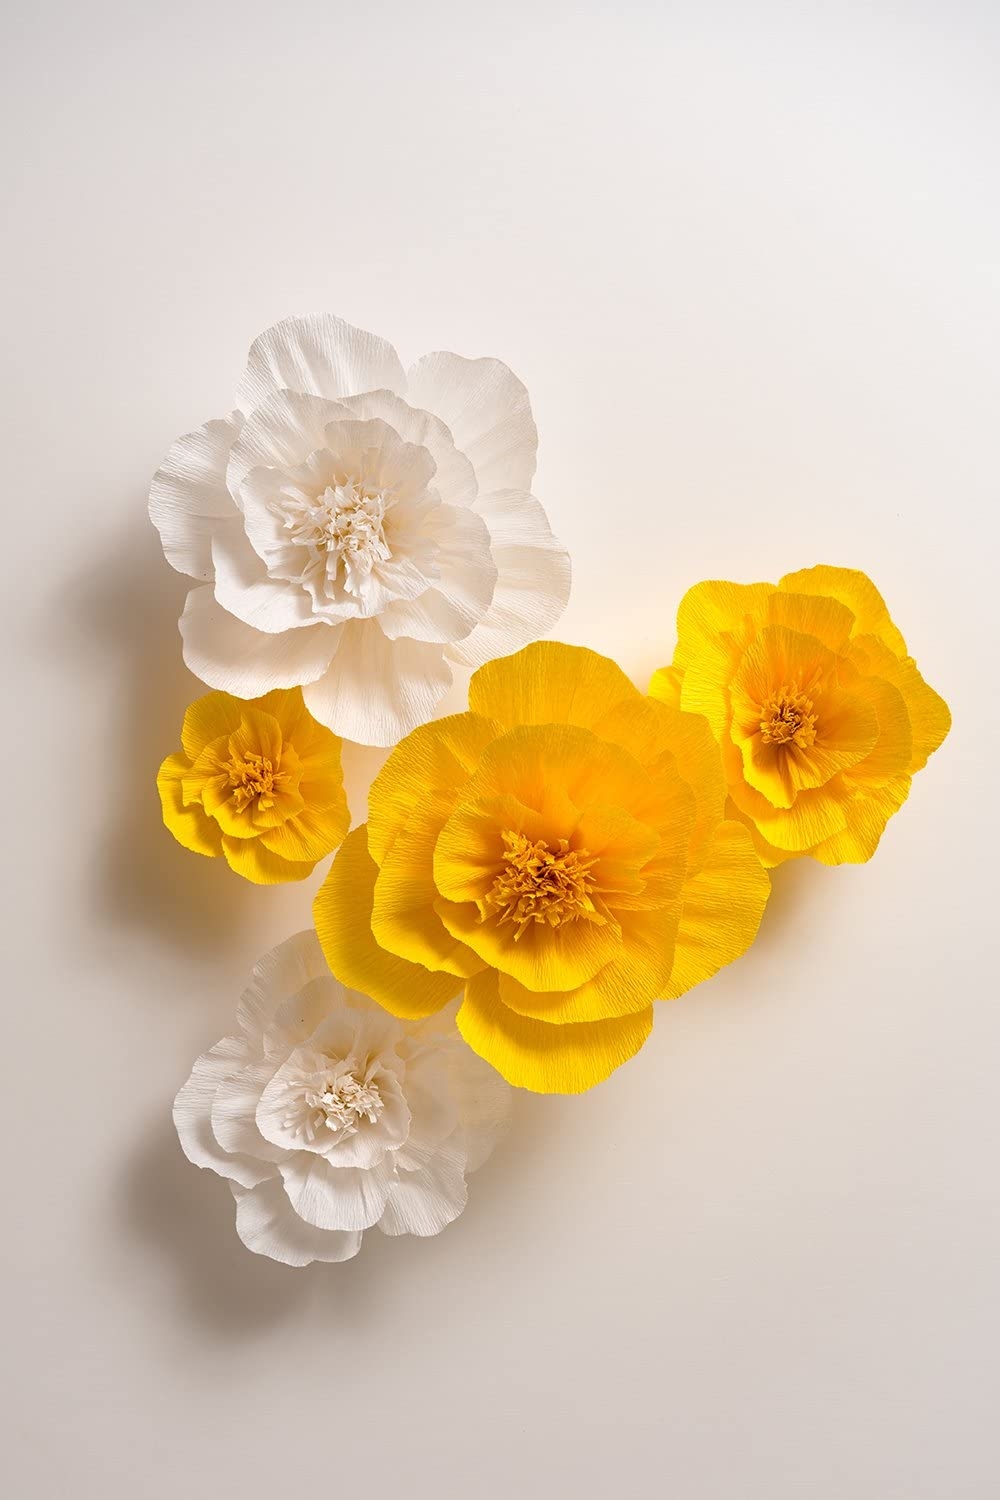 Yellow ,White Set of 5 Crepe 3D Handcrafted DIY Paper Flowers-GOON- Home Decoration, Christmas Decoration, Halloween Decor, Harvest Decor, Easter Decor, Thanksgiving Day Decor, Party Decor